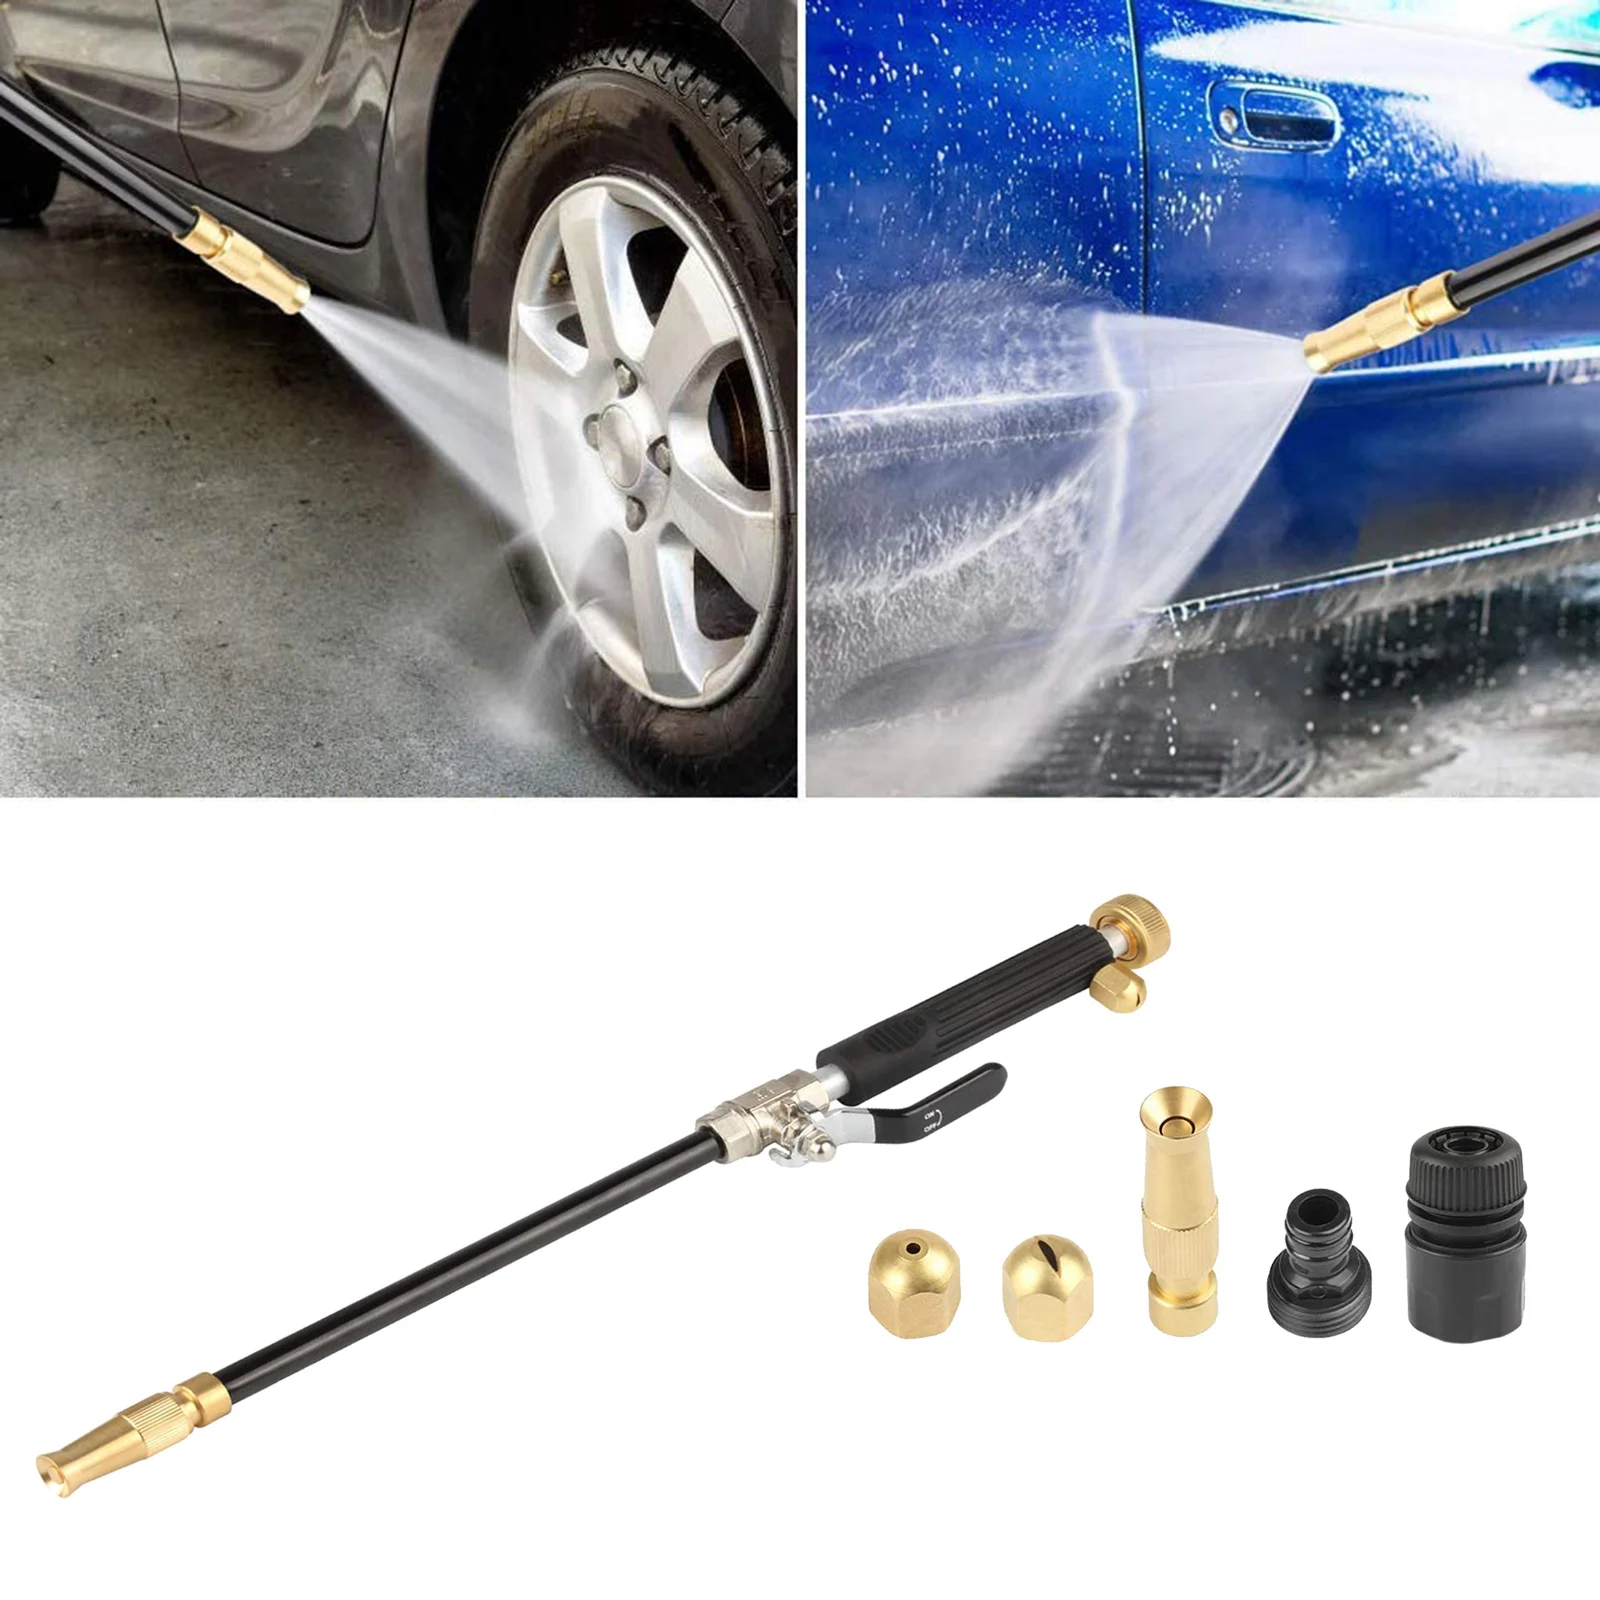 Details about   Pressure Power Washer Wall Water Spray Gun Nozzle Wand Attachment Hose Jet 